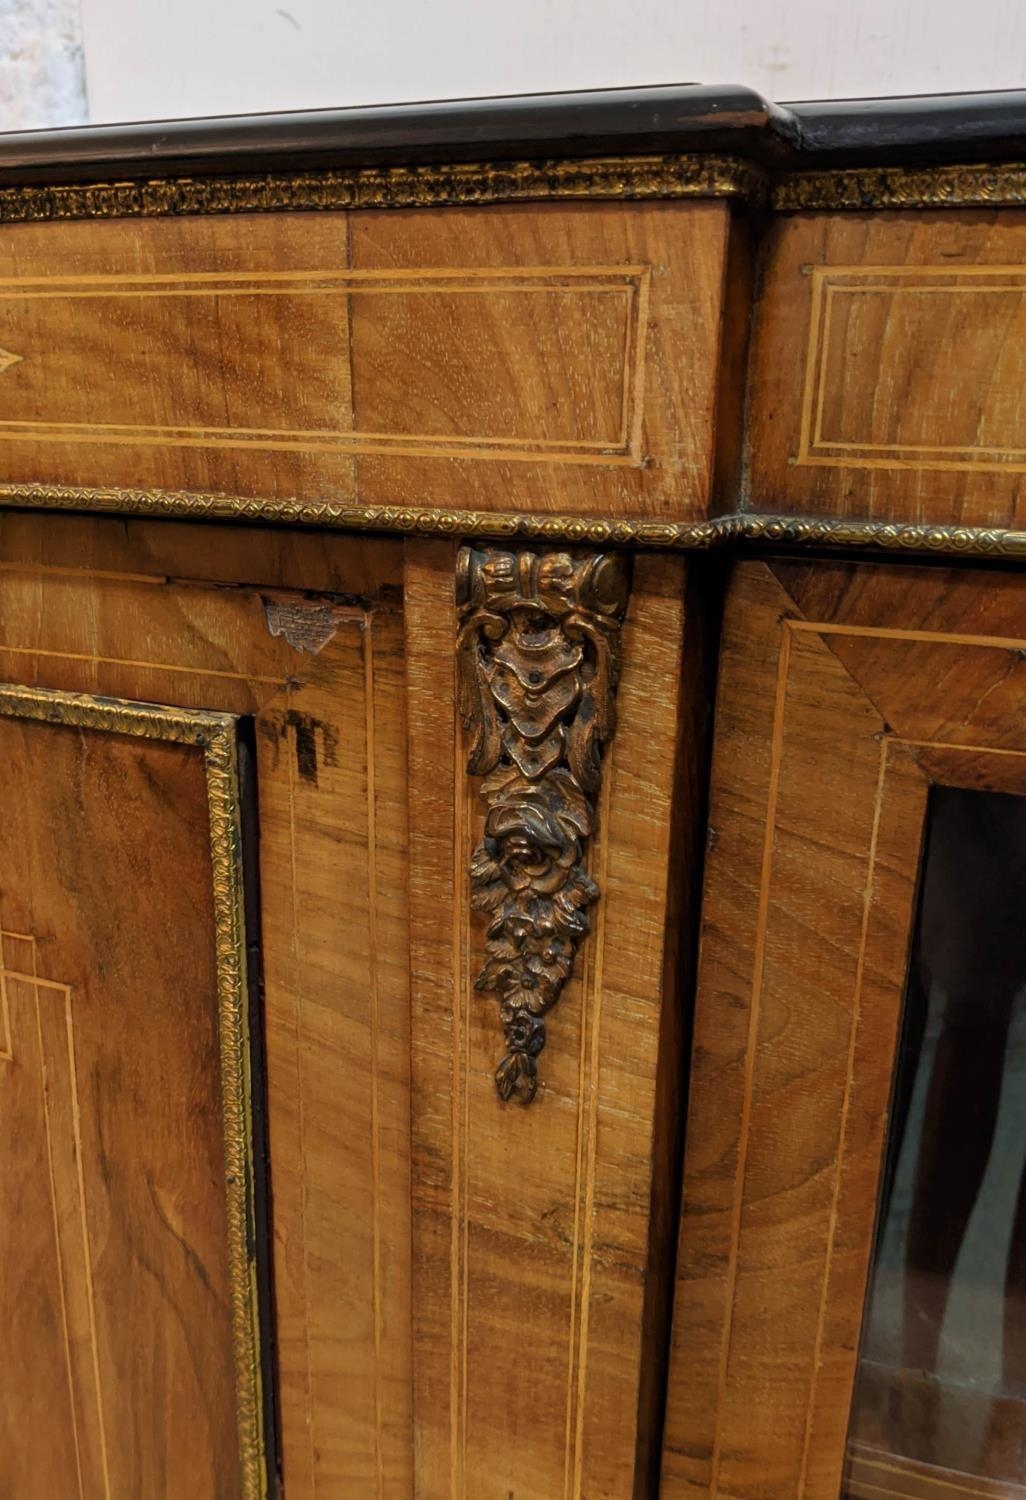 CREDENZA, 106cm H x 150cm W x 37cm D, Victorian walnut, marquetry and gilt metal mounted, with panel - Image 3 of 6